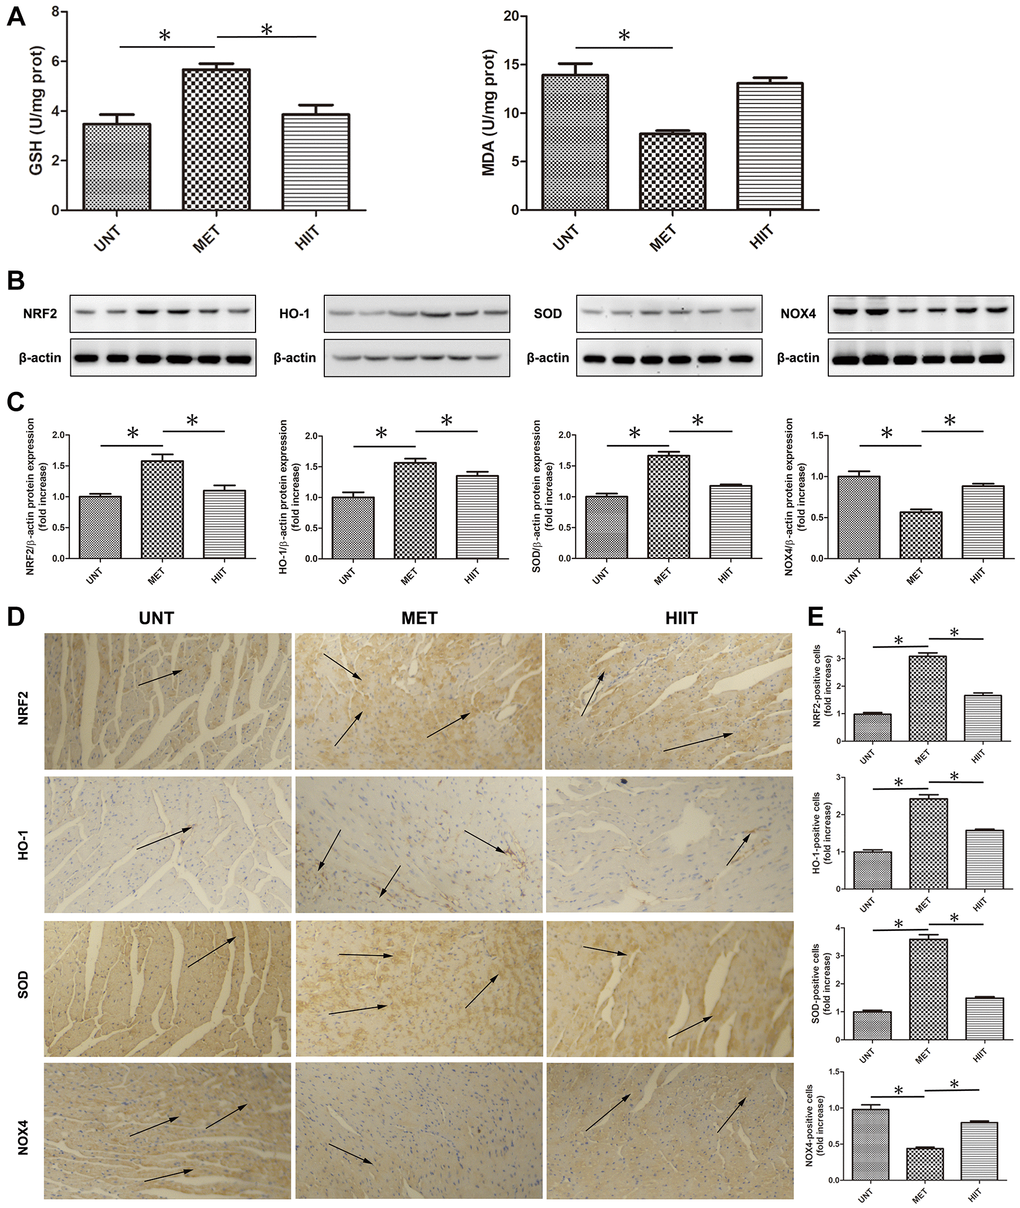 MET decreases oxidative stress in aging mice. (A) Cardiac MDA and GSH levels were quantified using commercial assay kits. n = 8 per group. *P B) Cardiac NRF2, HO-1, SOD, and NOX4 levels assessed by western blotting. (C) Quantification of relative protein expression levels. (D) Representative immunohistochemistry for NRF2, HO-1, SOD, and NOX4 in cardiac tissues. (E) Quantification of positive expression. Magnification 40×. The arrows indicate positively stained cells. n = 6–8 per group. *P 